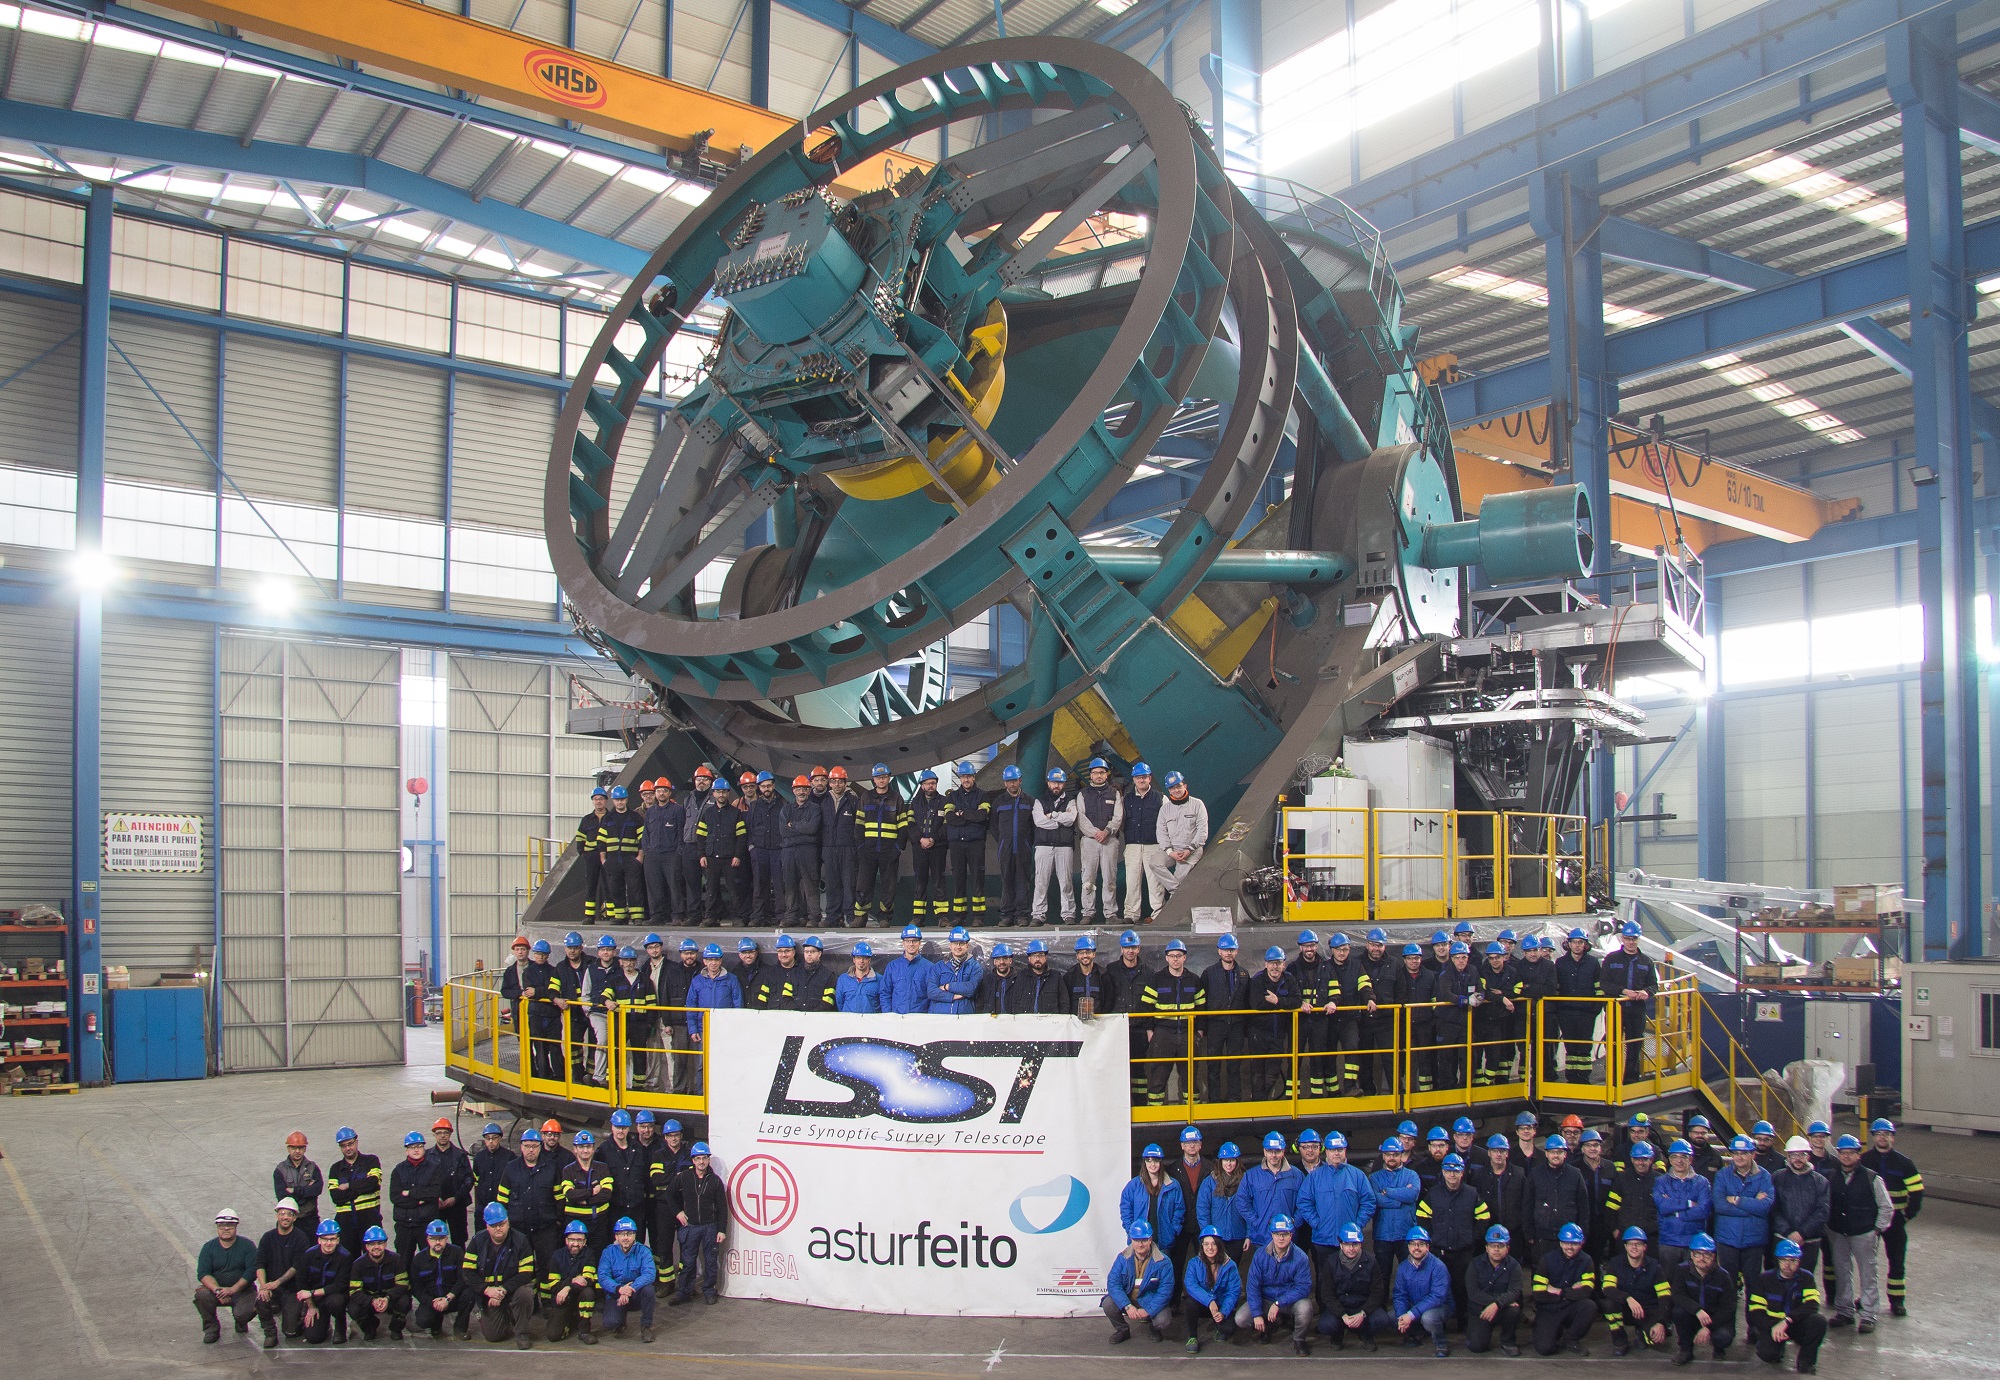 The LSST telescope mount assembly and project team. Photo: Astturfeito/Obs/NSF/AURA